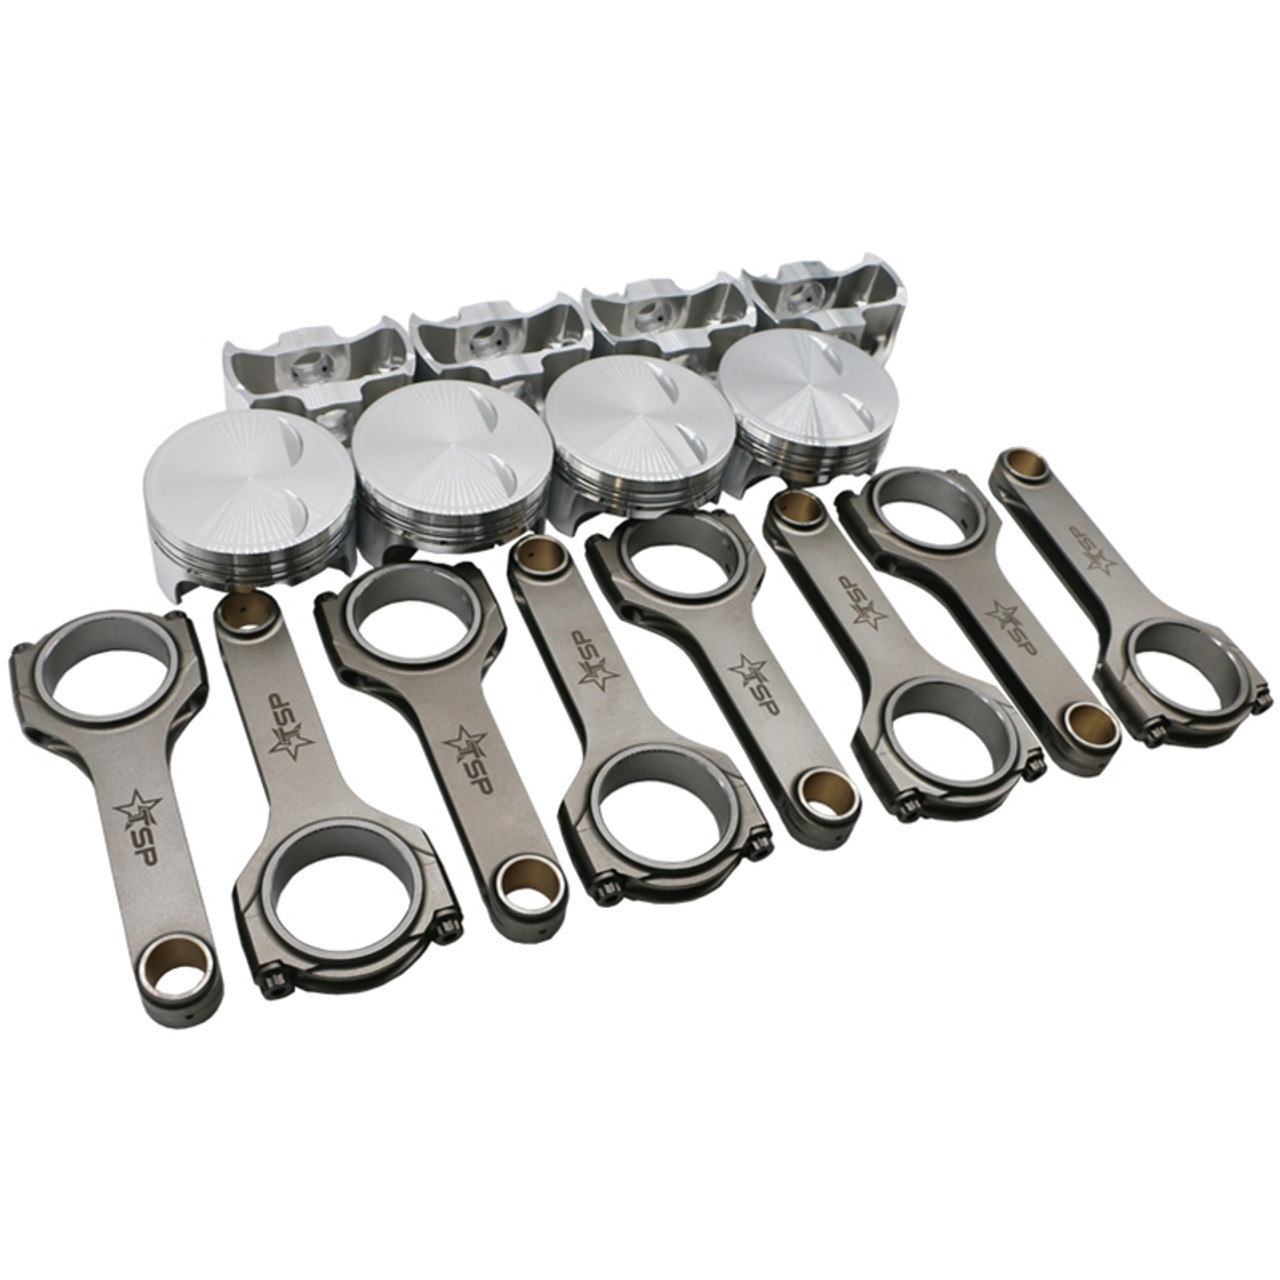 Texas Speed LS3 6.2L LS Drop-in Forged Piston & Rod Set, Gen 4, JE Flat Top Pistons, TSP H-Beam Rods, Rings, Bearings - No Balance when used with stock Crankshaft